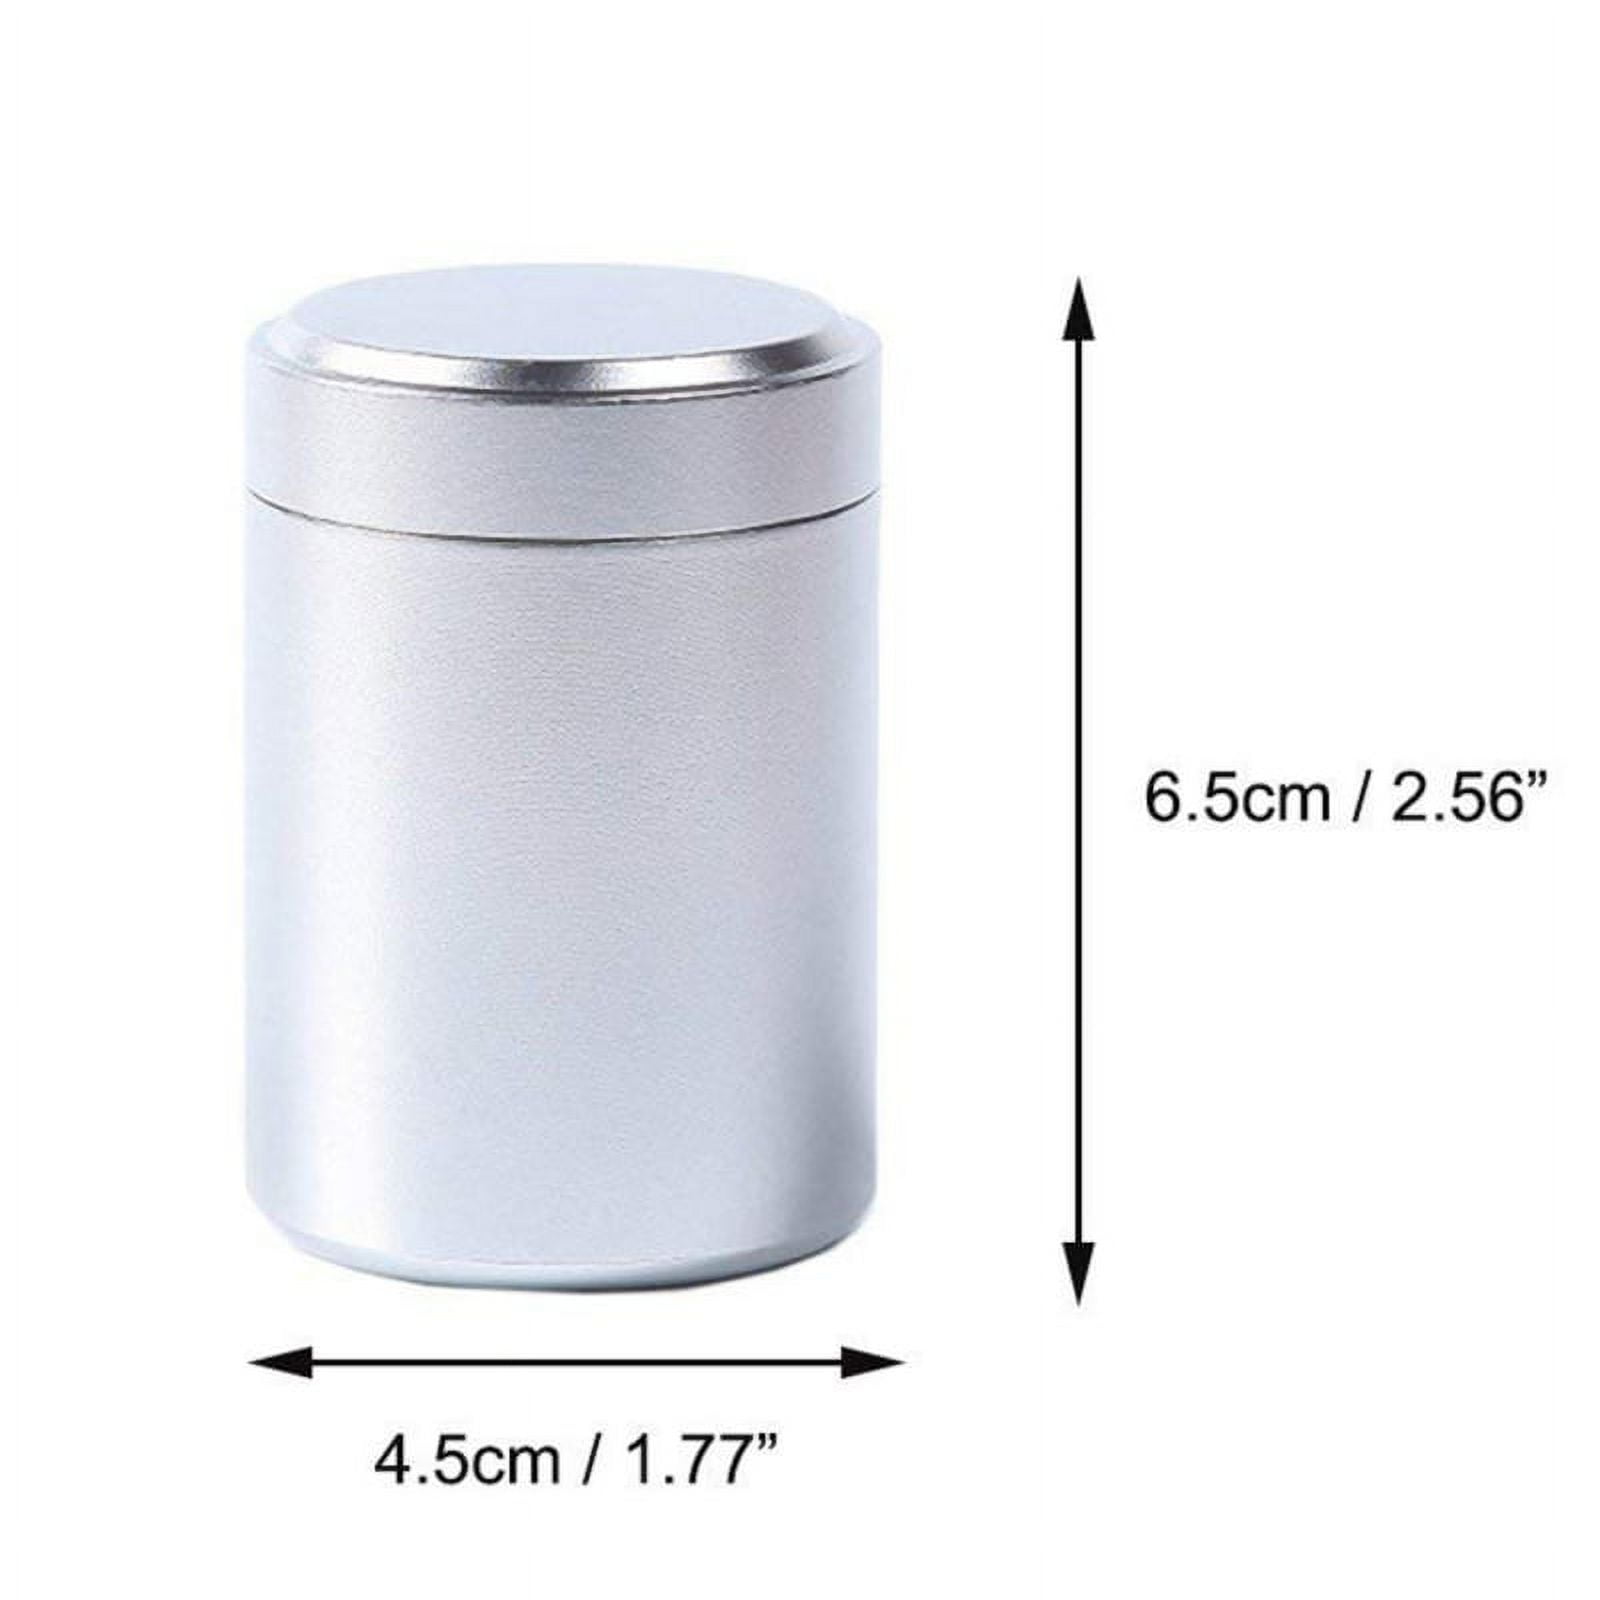 MAGICLULU Box Candy in Bulk Coffee Bean Container Metal Tin Containers Food  Tinplate Containers Small Containers for Organizing Tea Leaf Christmas